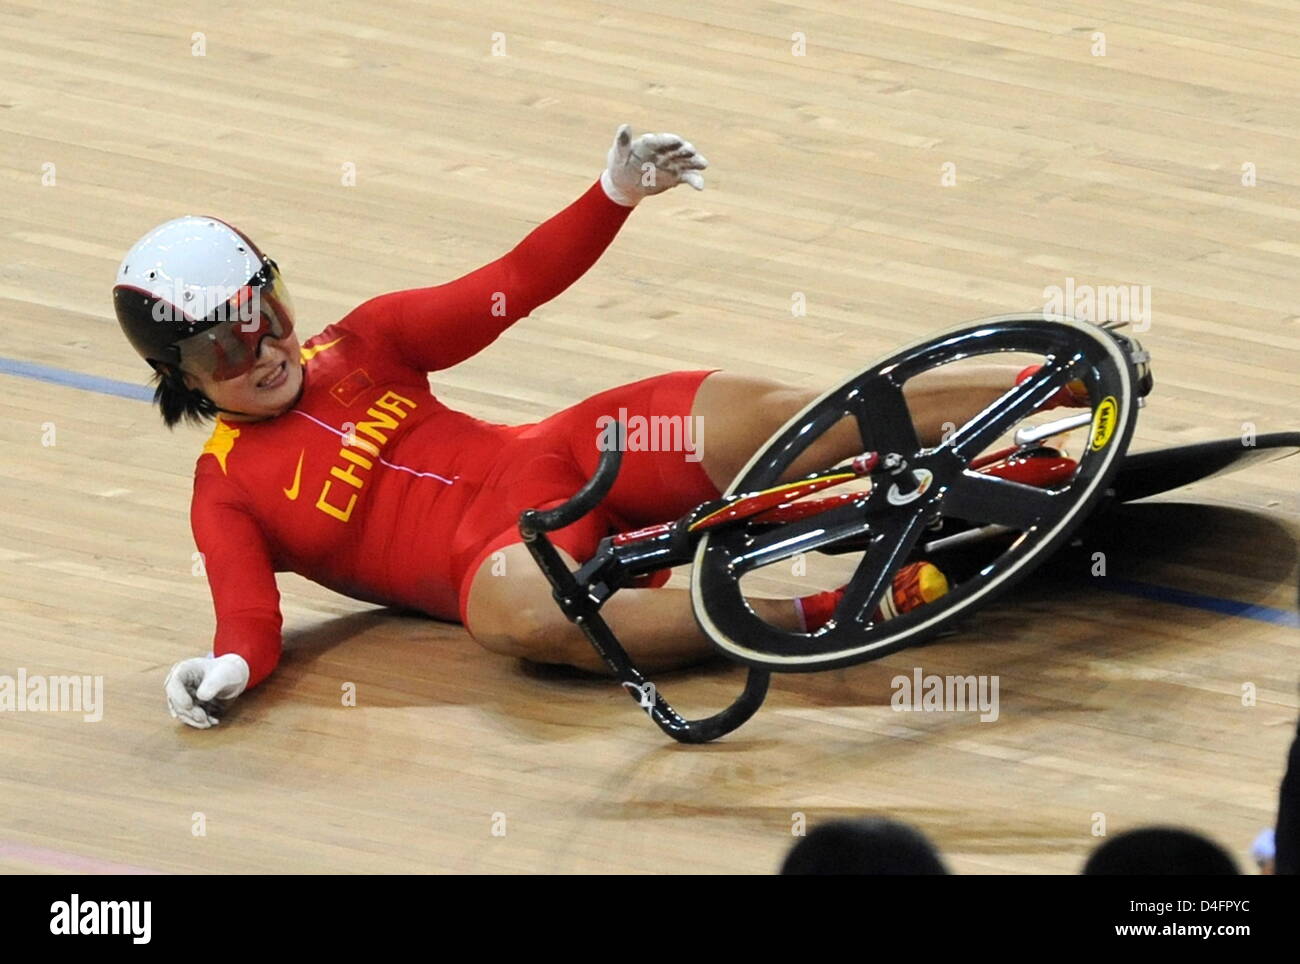 Guo Shuang from China crashes on the ground in the Women's Sprint Semifinals in the Cycling - Track competition at Laoshan Velodrome at the Beijing 2008 Olympic Games, Beijing, China, 19 August 2008. Photo: Peer Grimm dpa ###dpa### Stock Photo